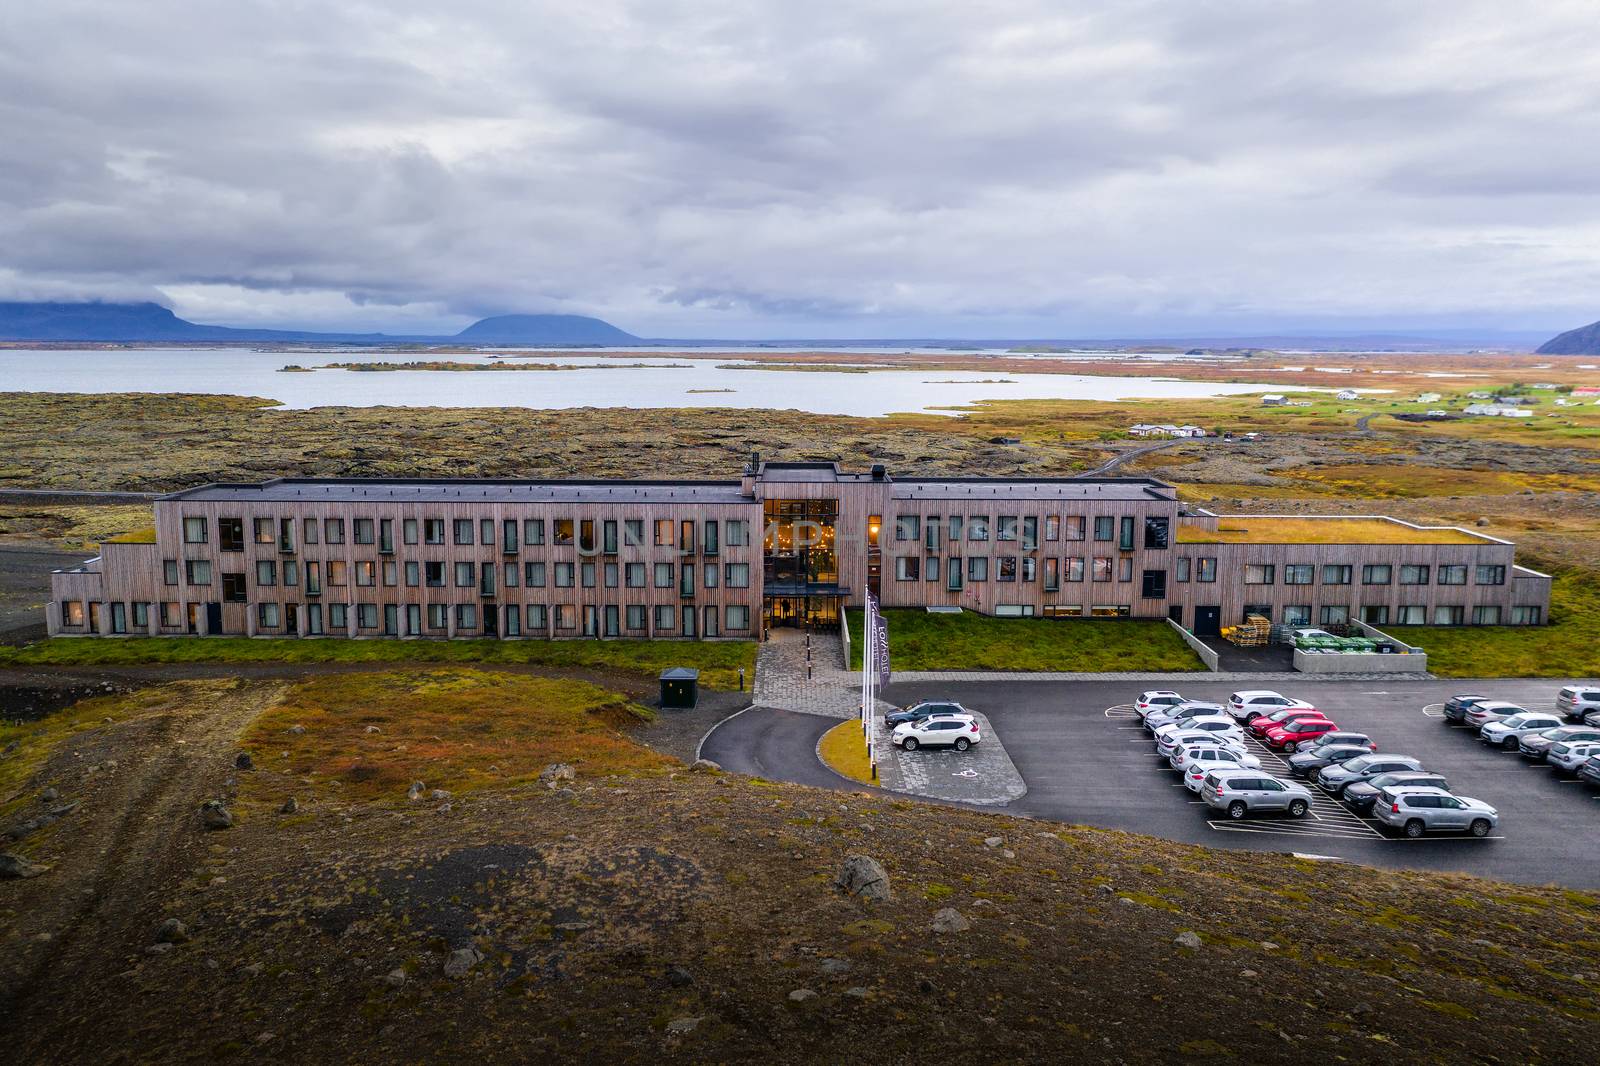 Myvatn, Iceland - September 10, 2019 : Fosshotel Myvatn with a restaurant, a four-star hotel in Skutustadahreppur, located near a lake on the Ring Road and surrounded by beautiful icelandic nature.